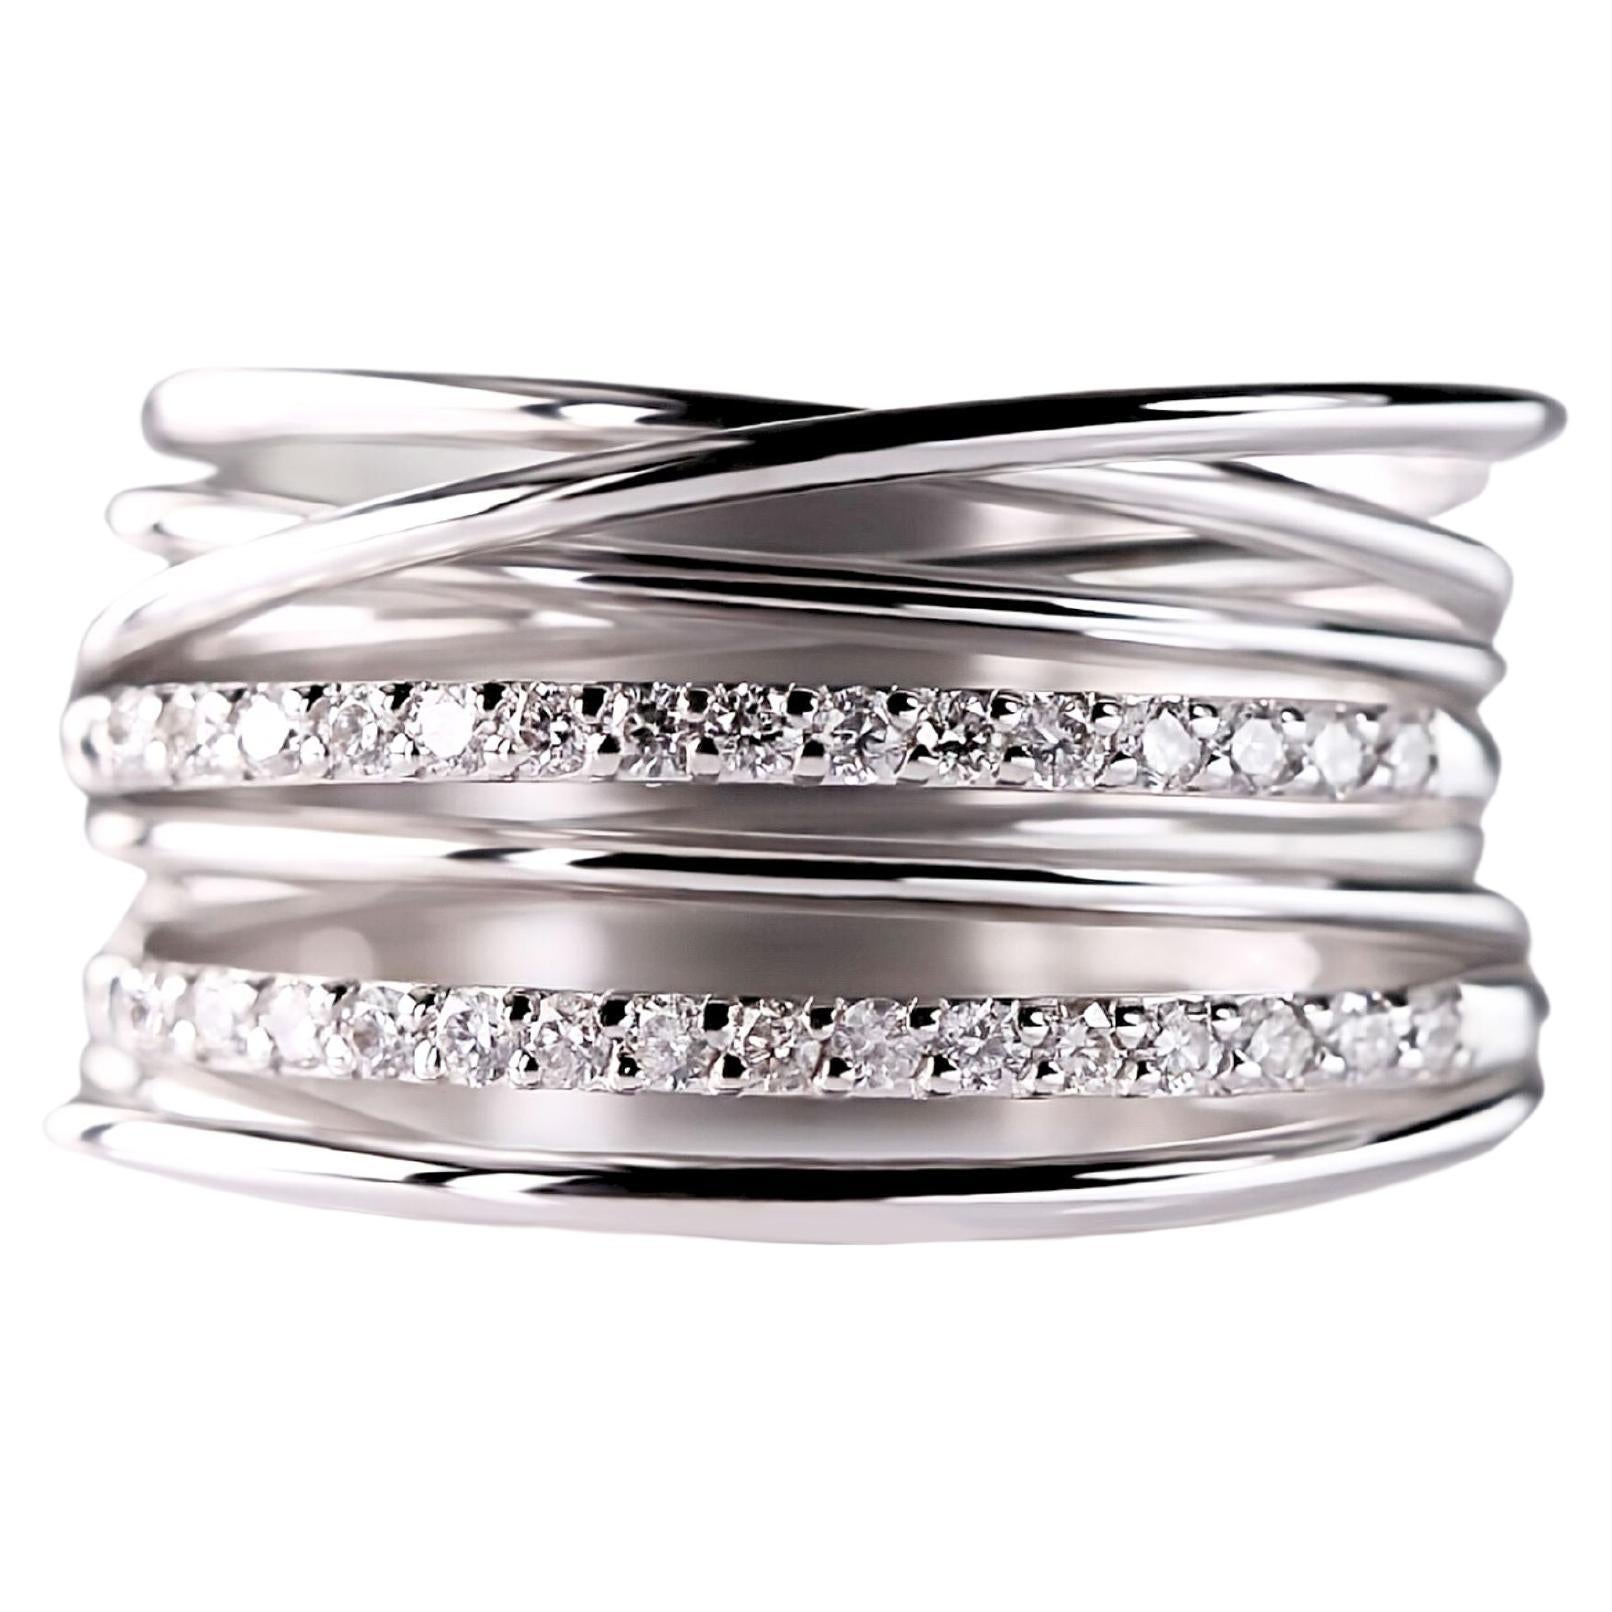 Simplicity in Motion: Abstract 18kt white Gold Ring with Diamonds